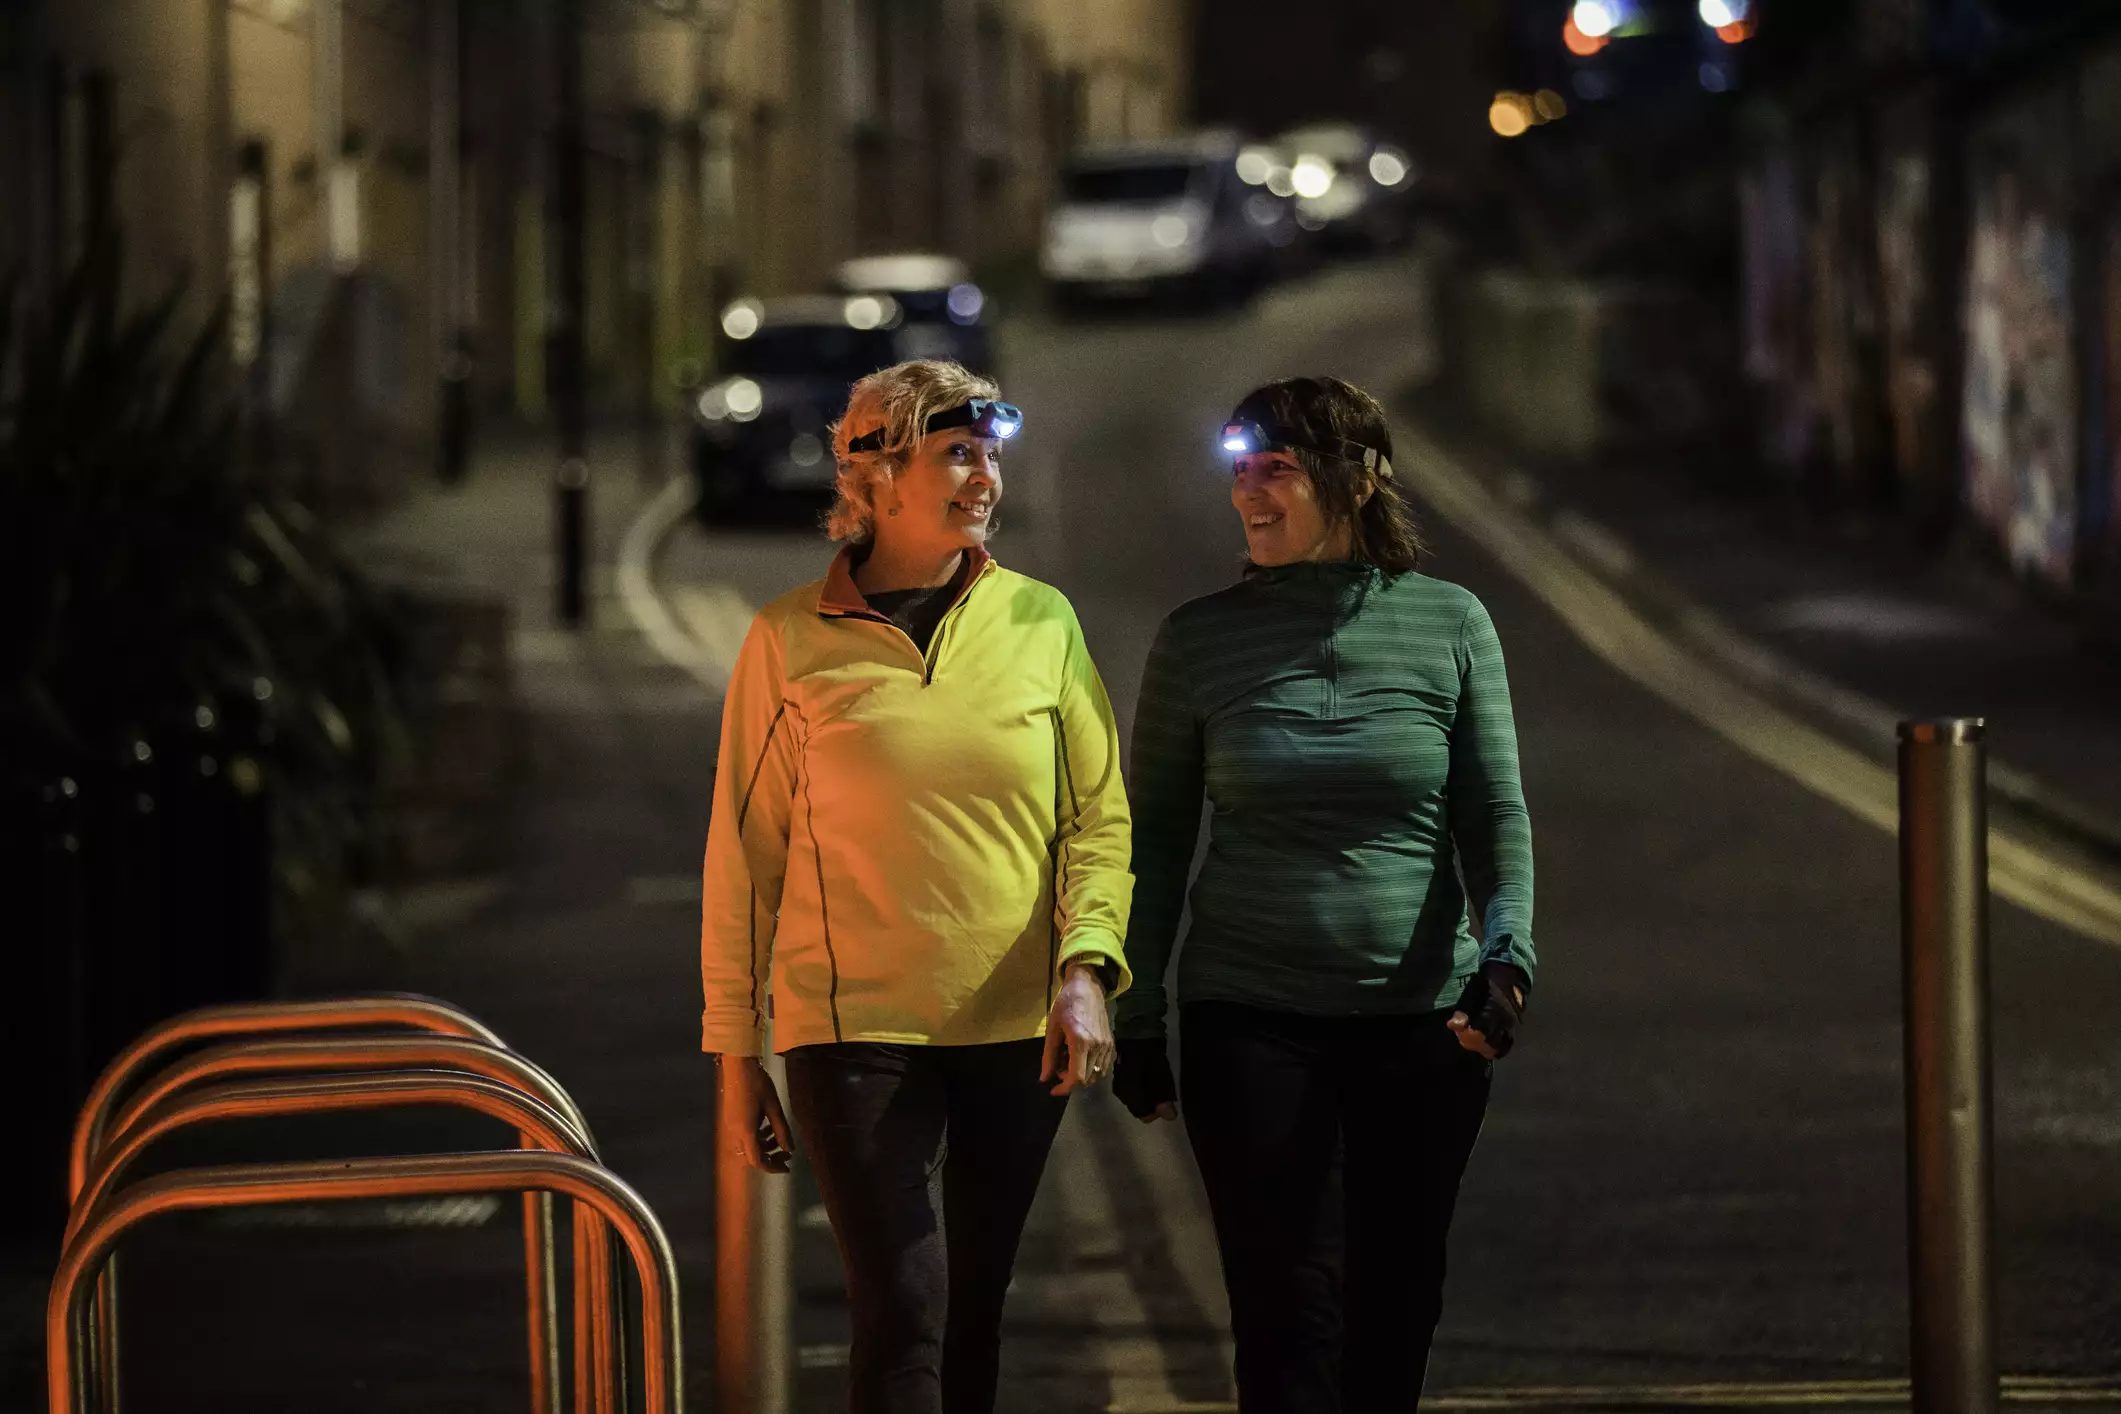 Two friends with headlamps walking together at night